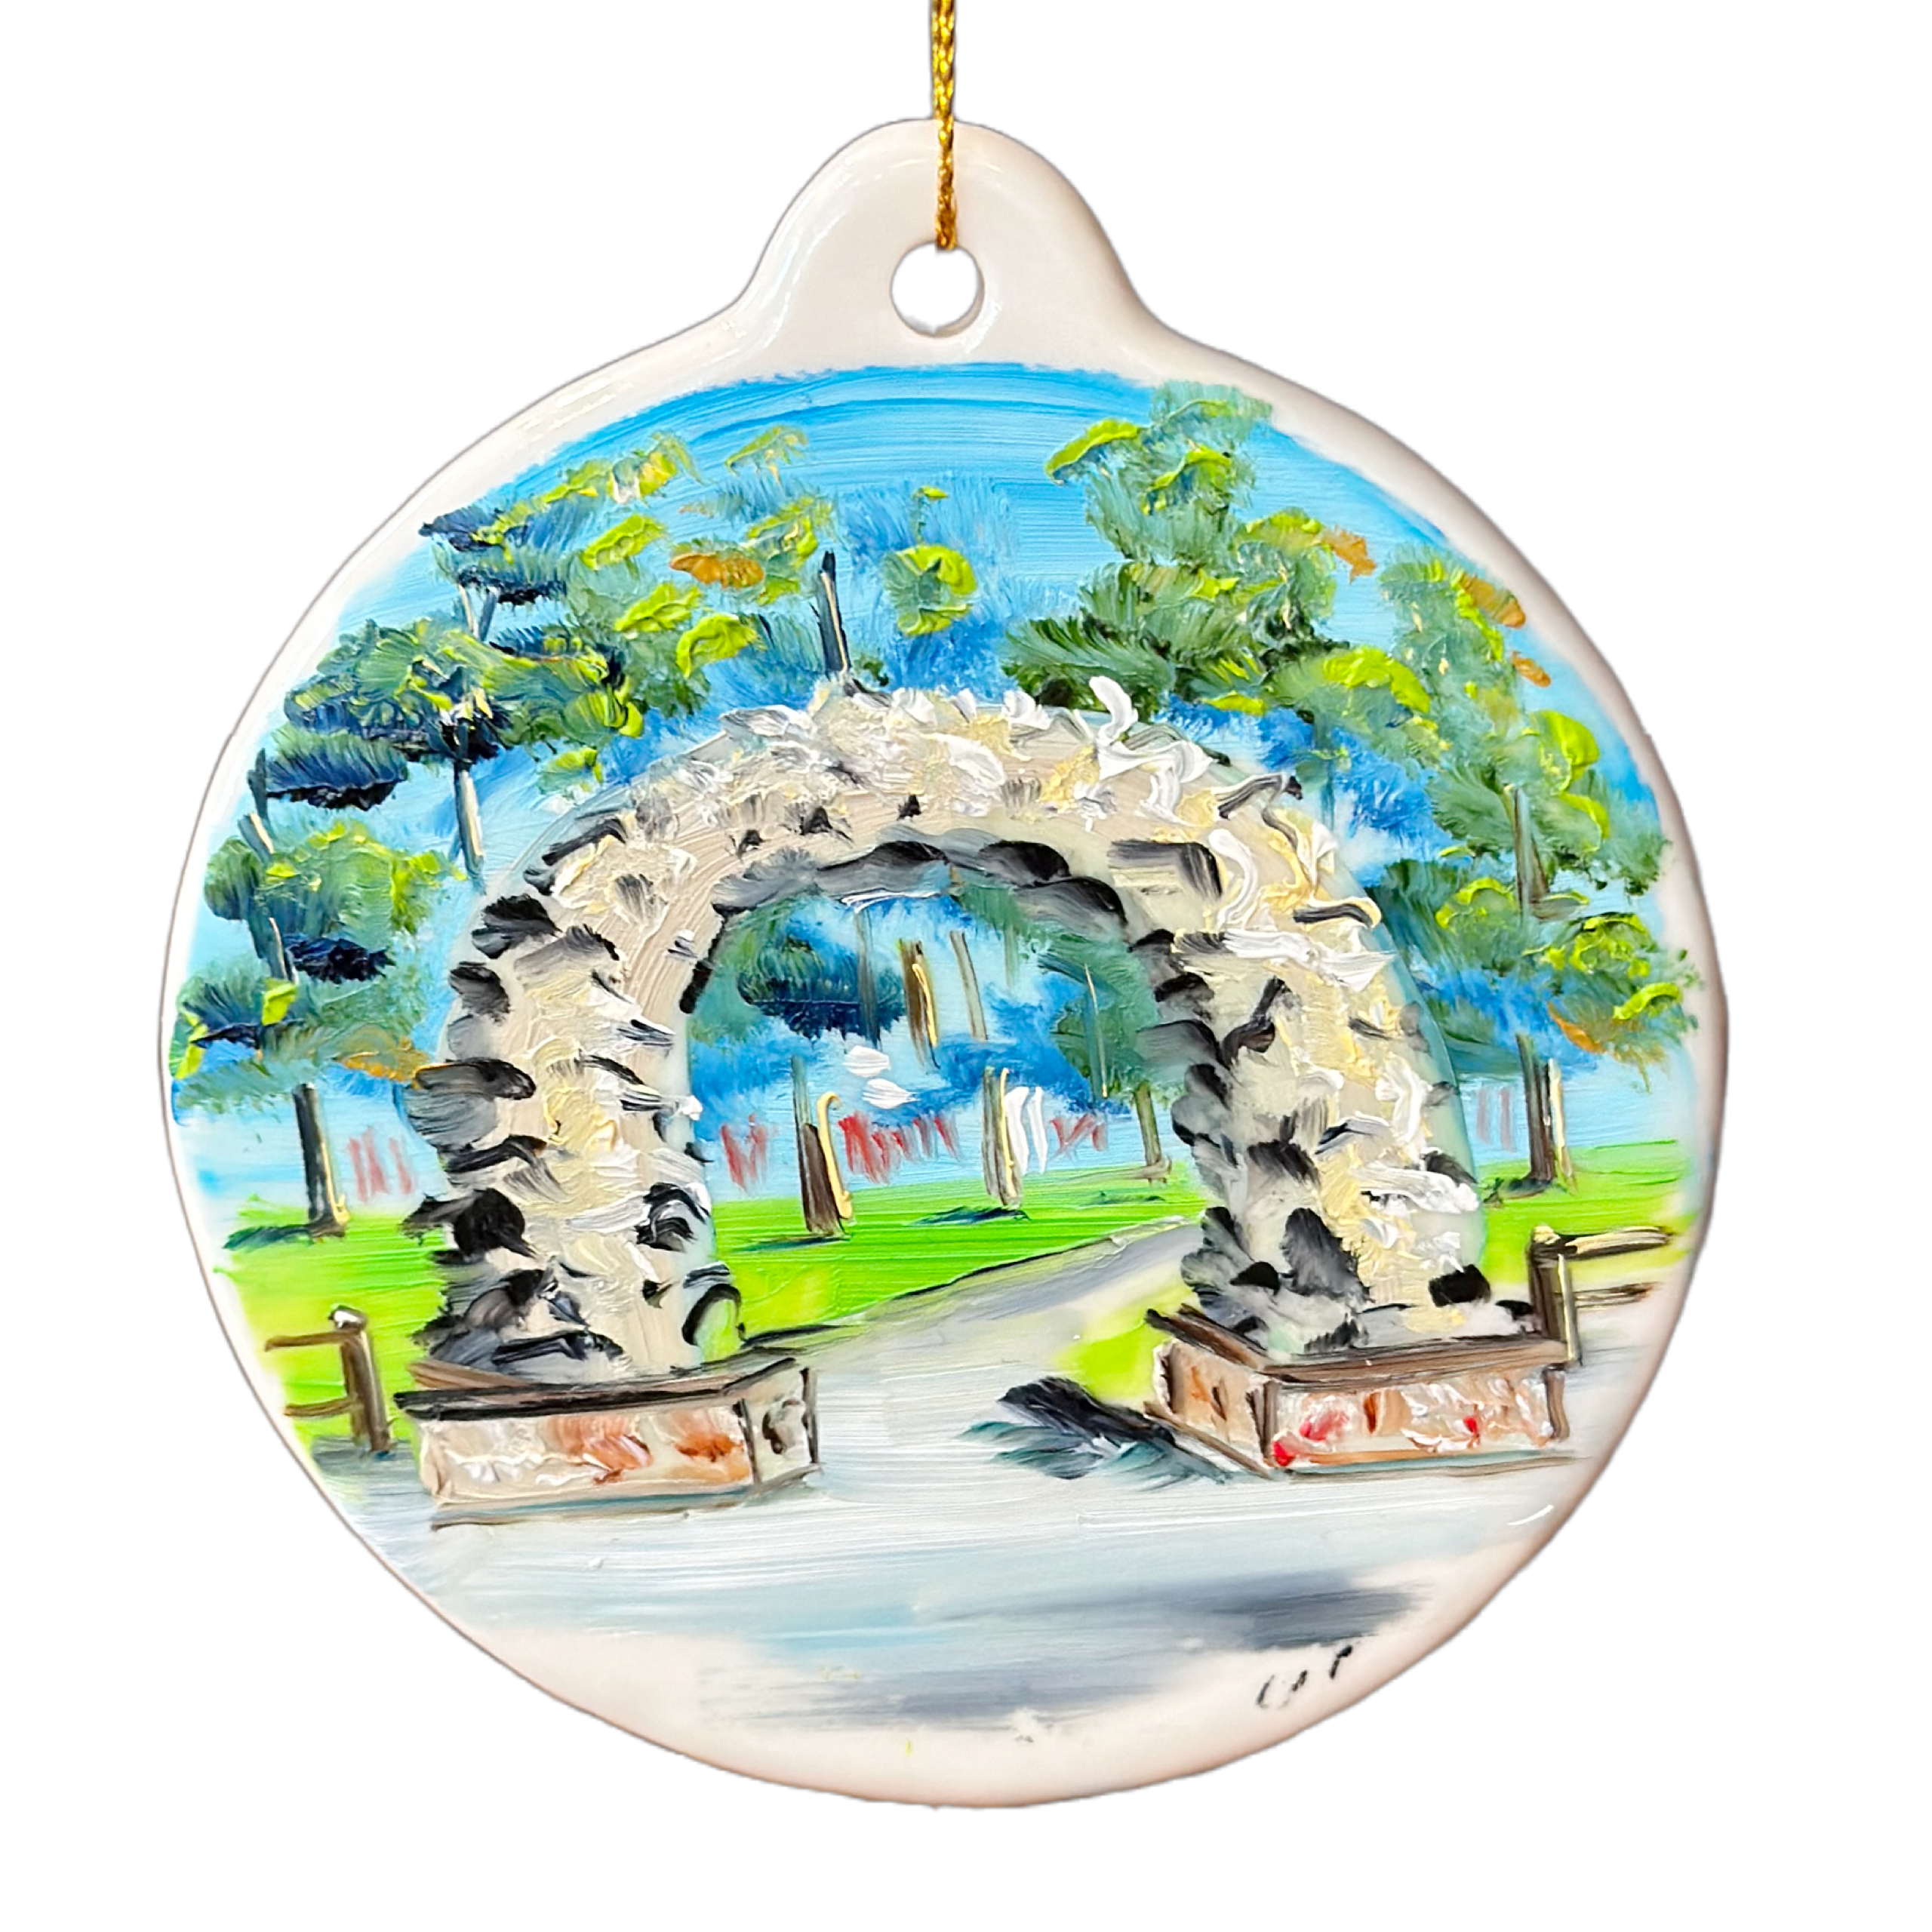 Antler Arch Ornament - Hand Painted